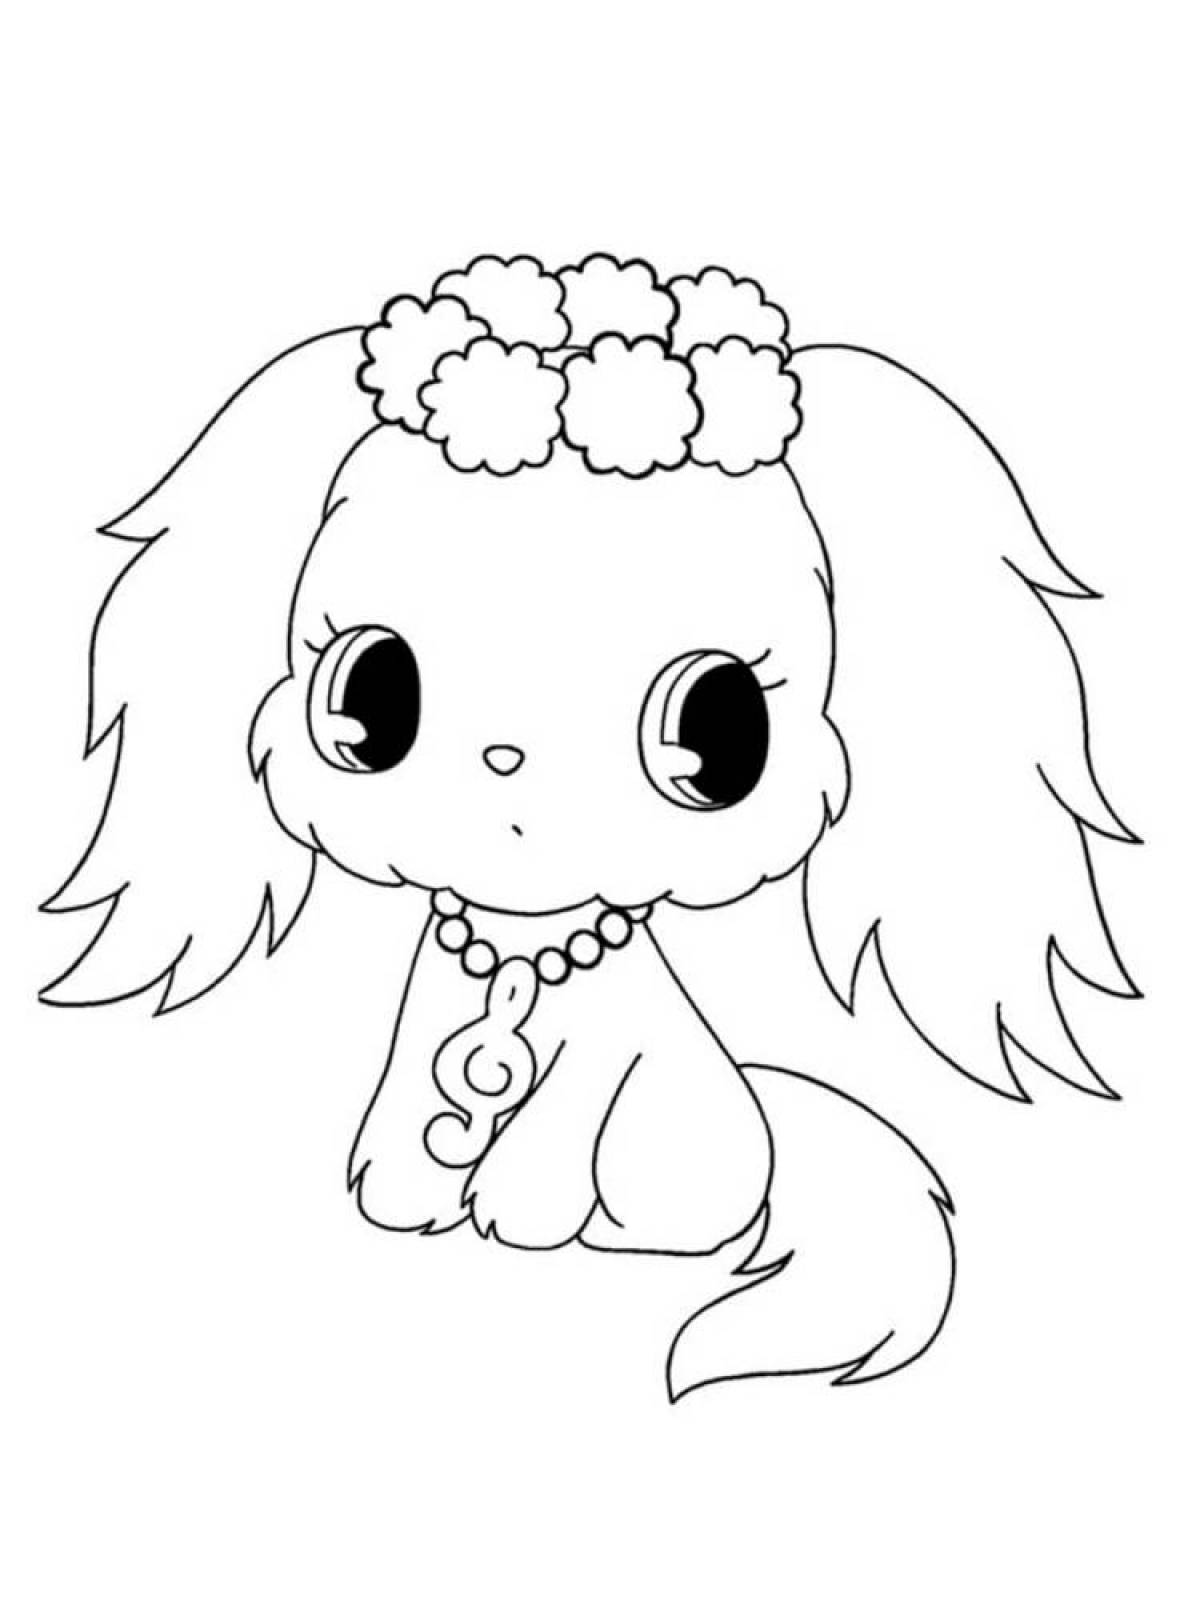 Cute coloring pages for girls animals cute